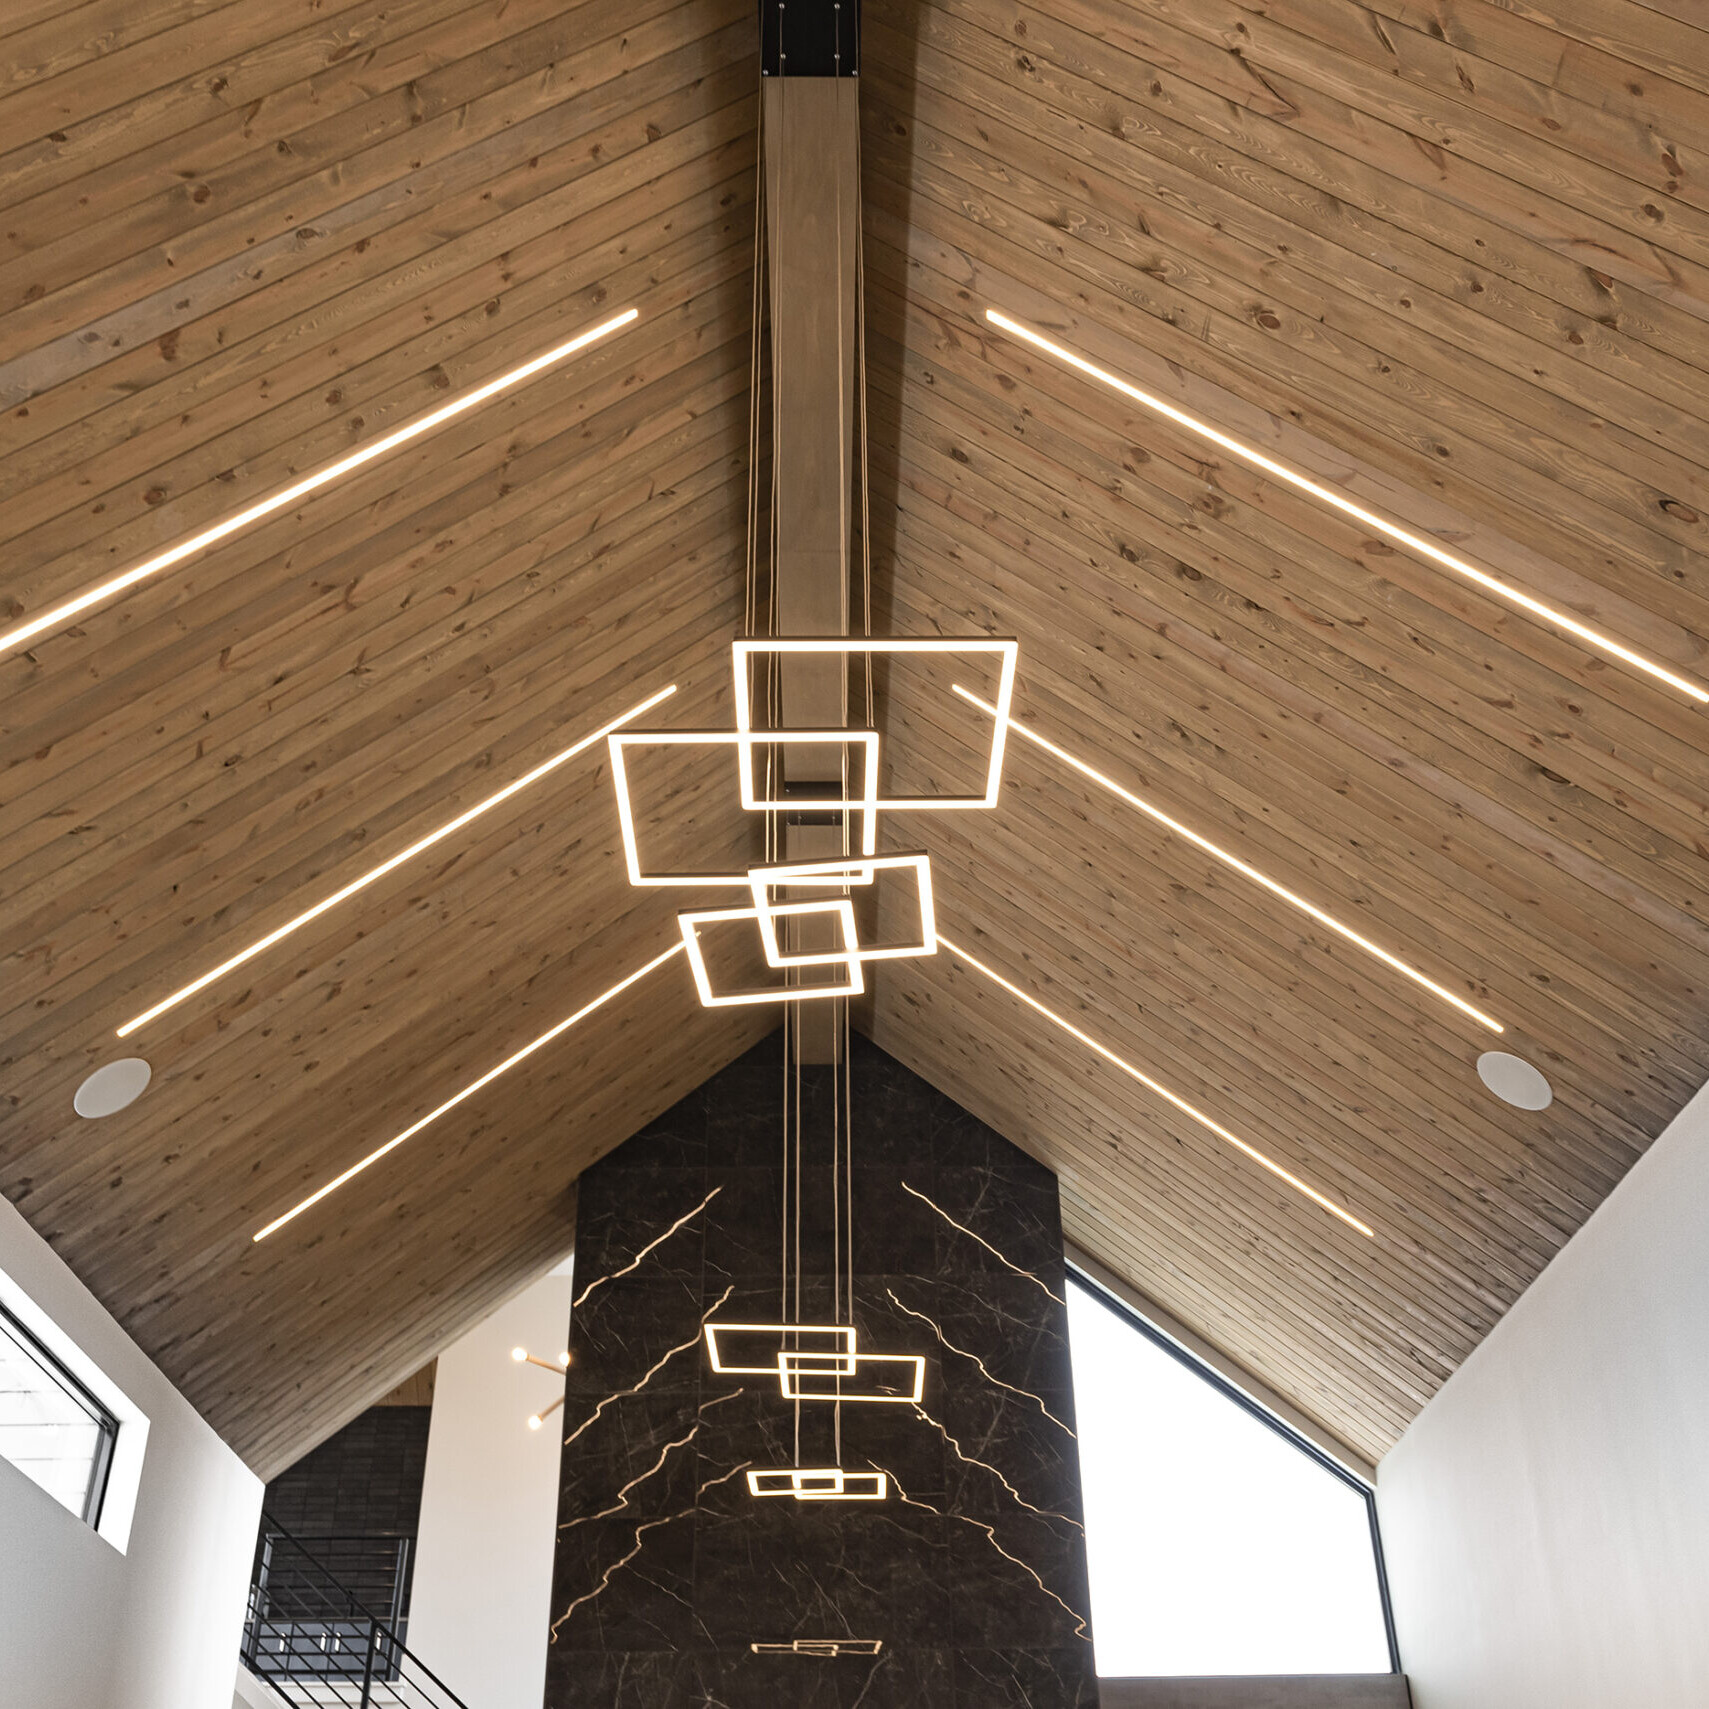 The ceiling of a building with wooden beams.